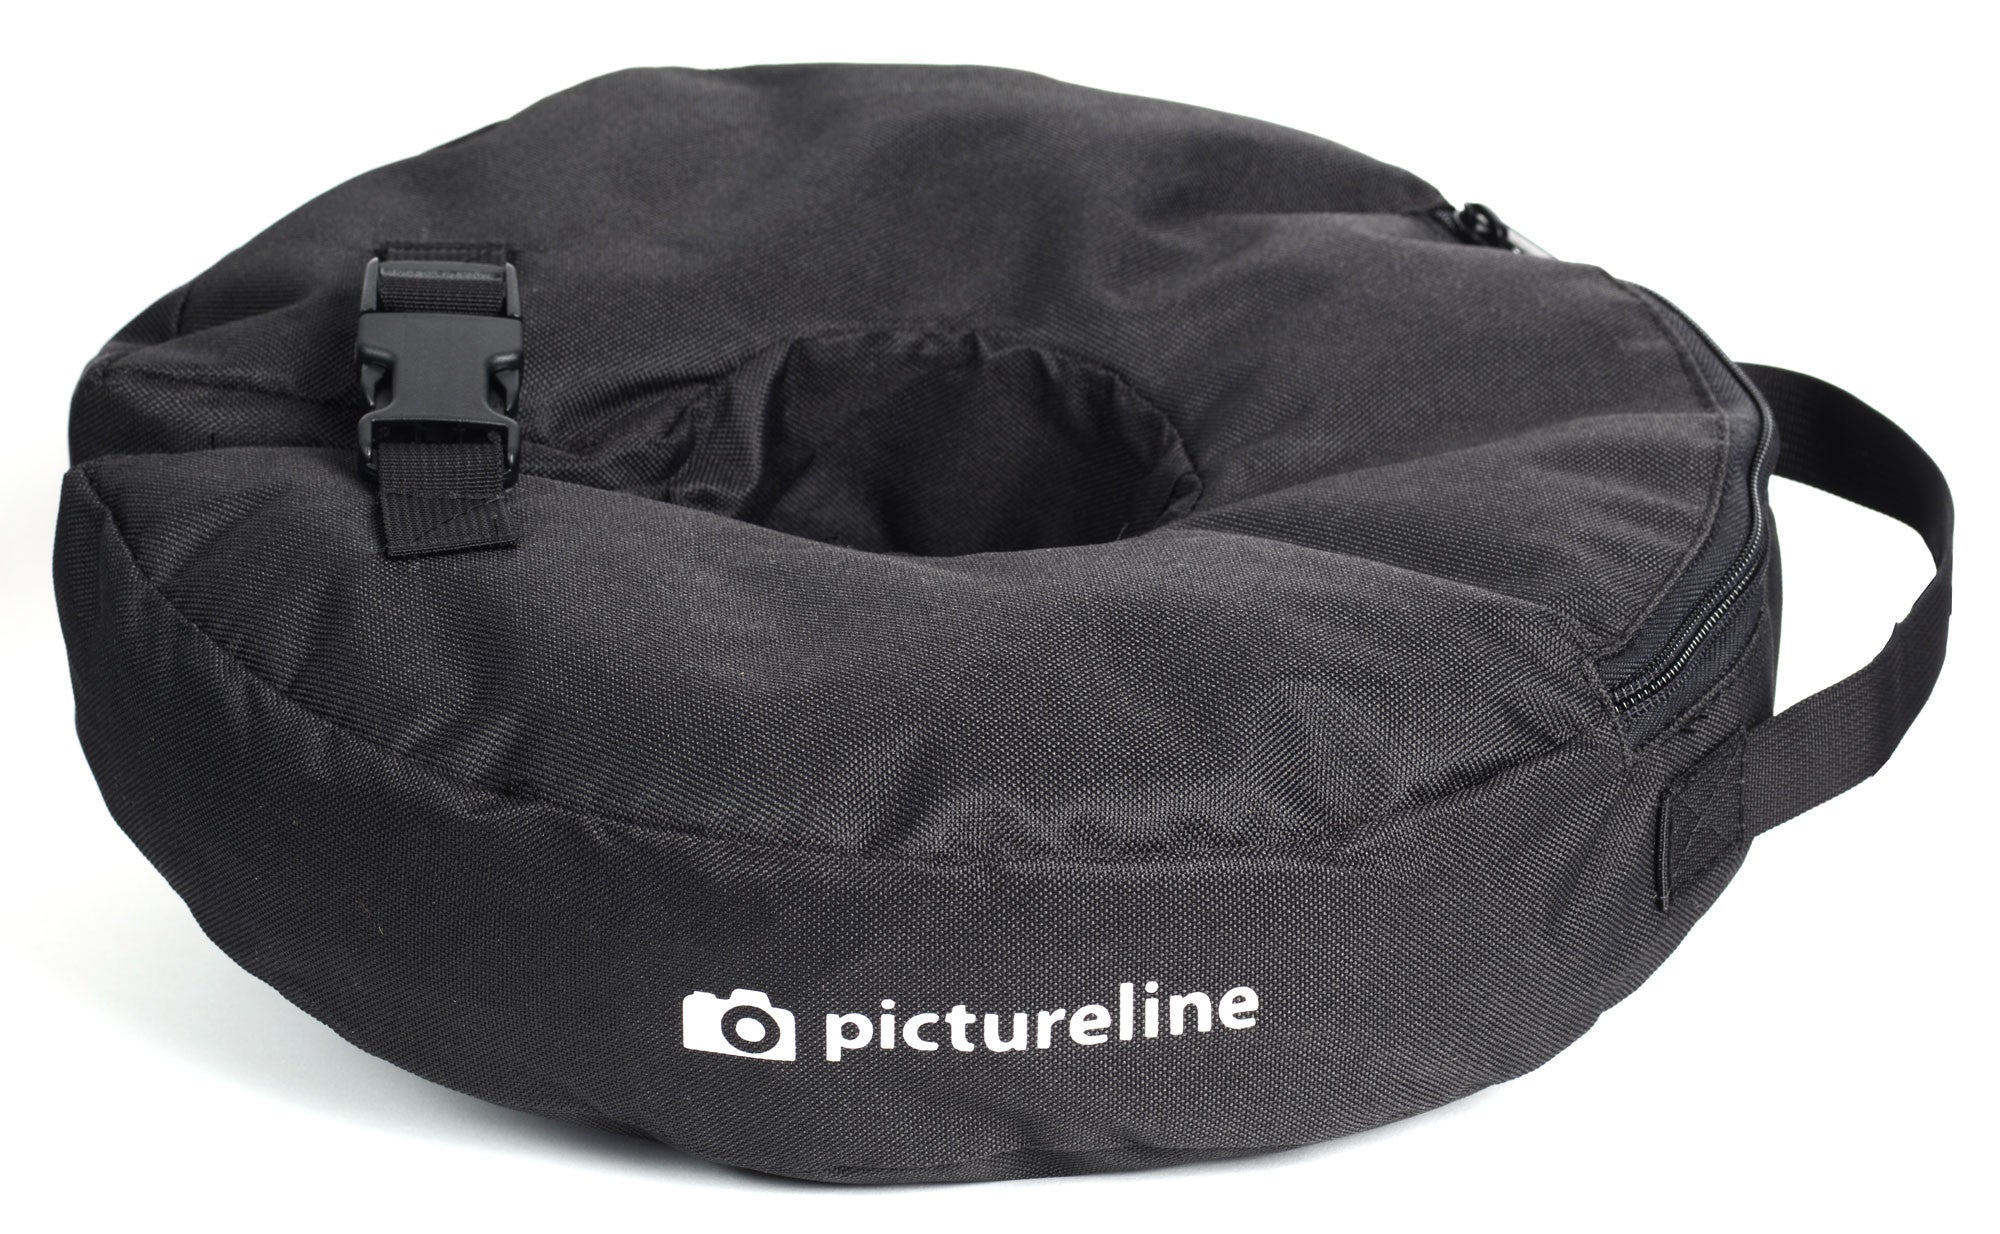 Pictureline Circular Weight Bag, supports general accessories, pictureline - Pictureline 